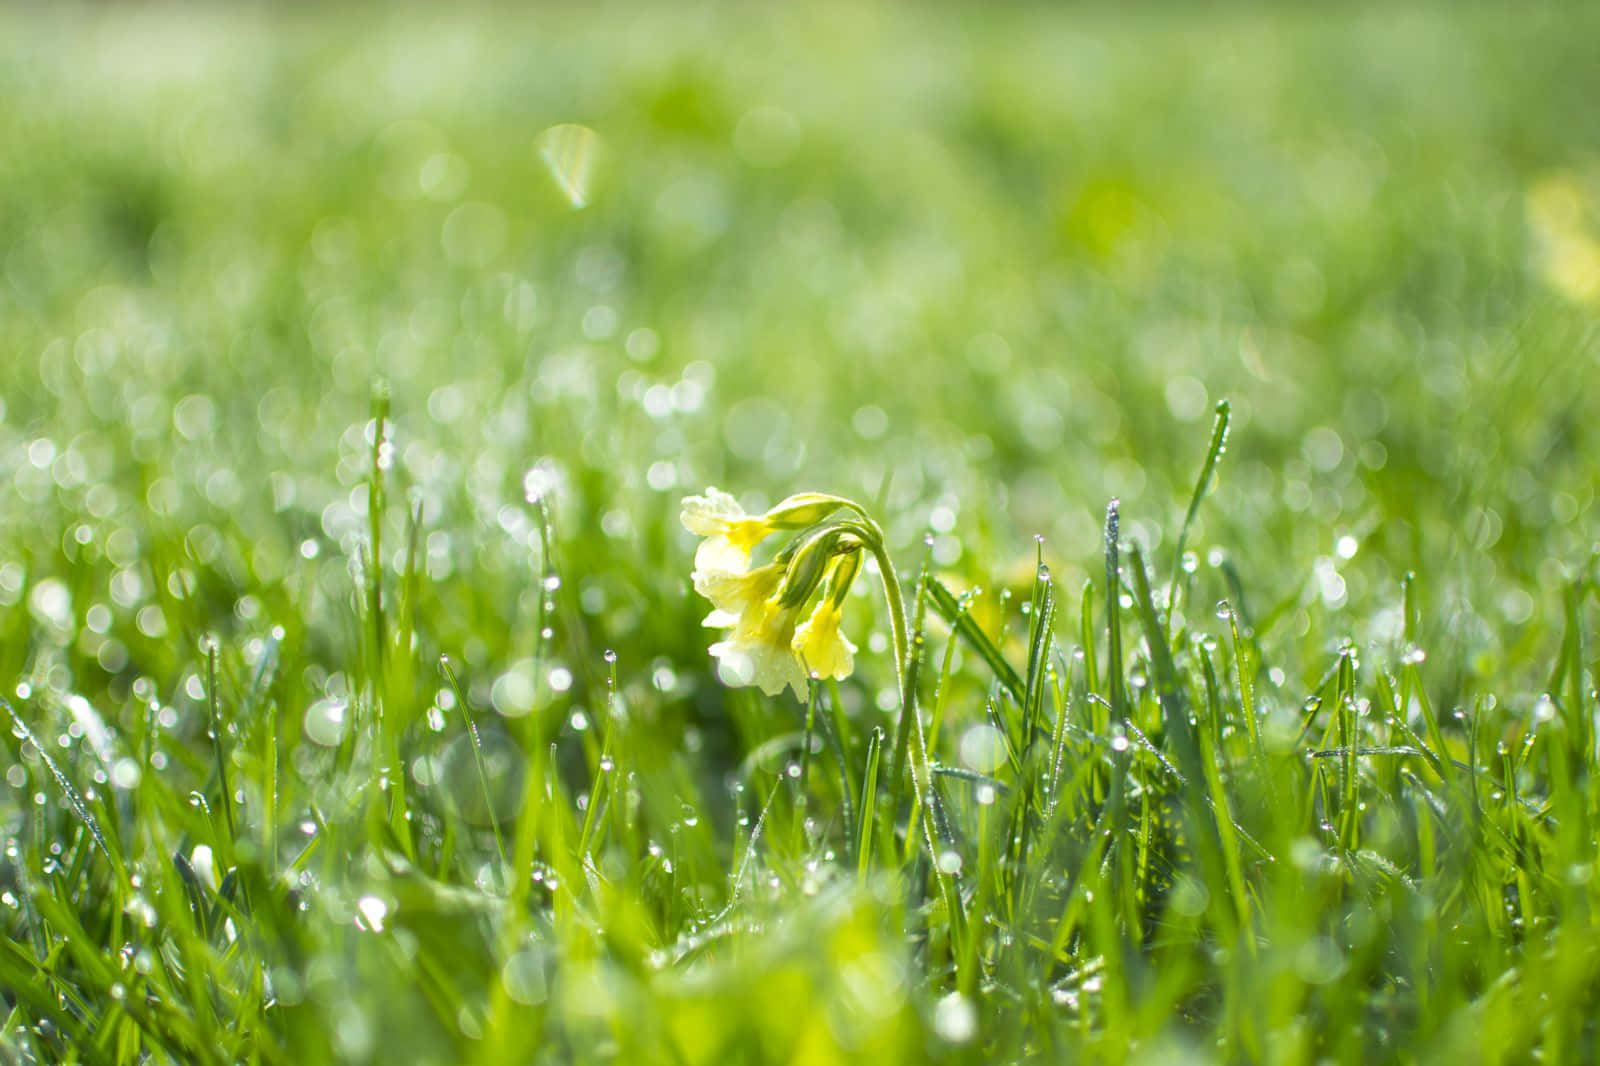 Lush Spring Grass Vibrantly Covers a Field Wallpaper